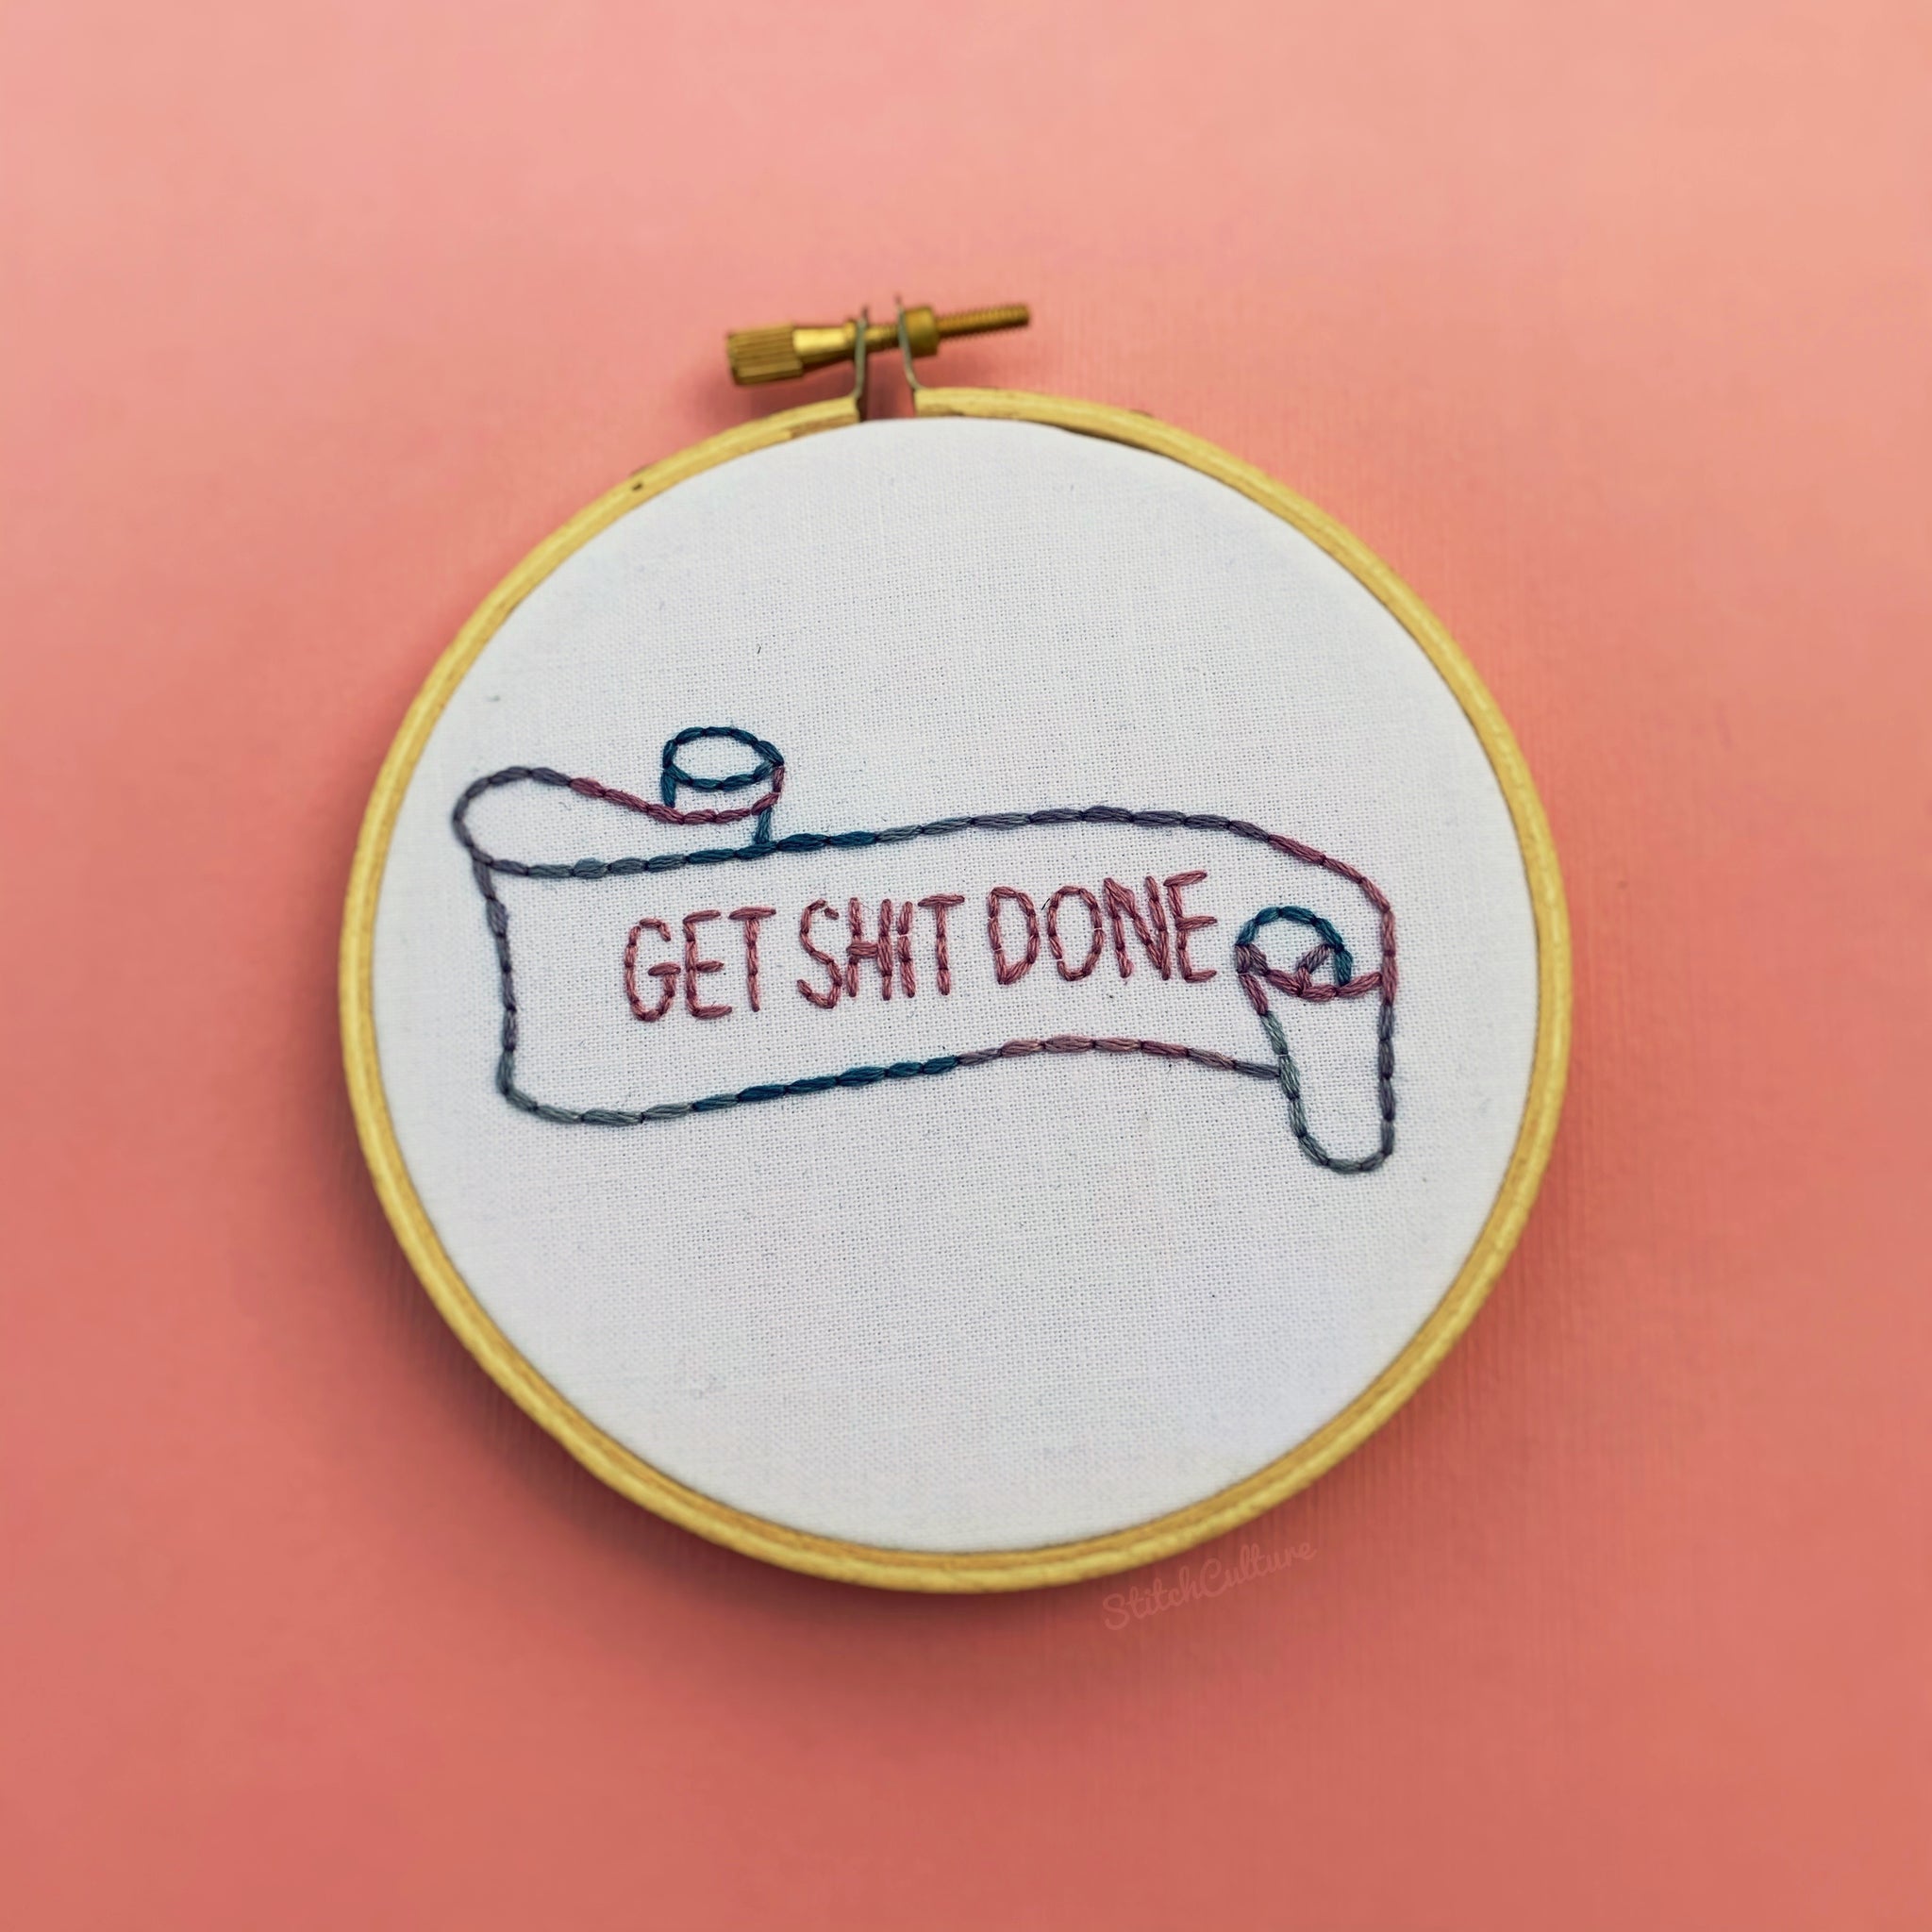 GET SHIT DONE / motivational embroidery hoop